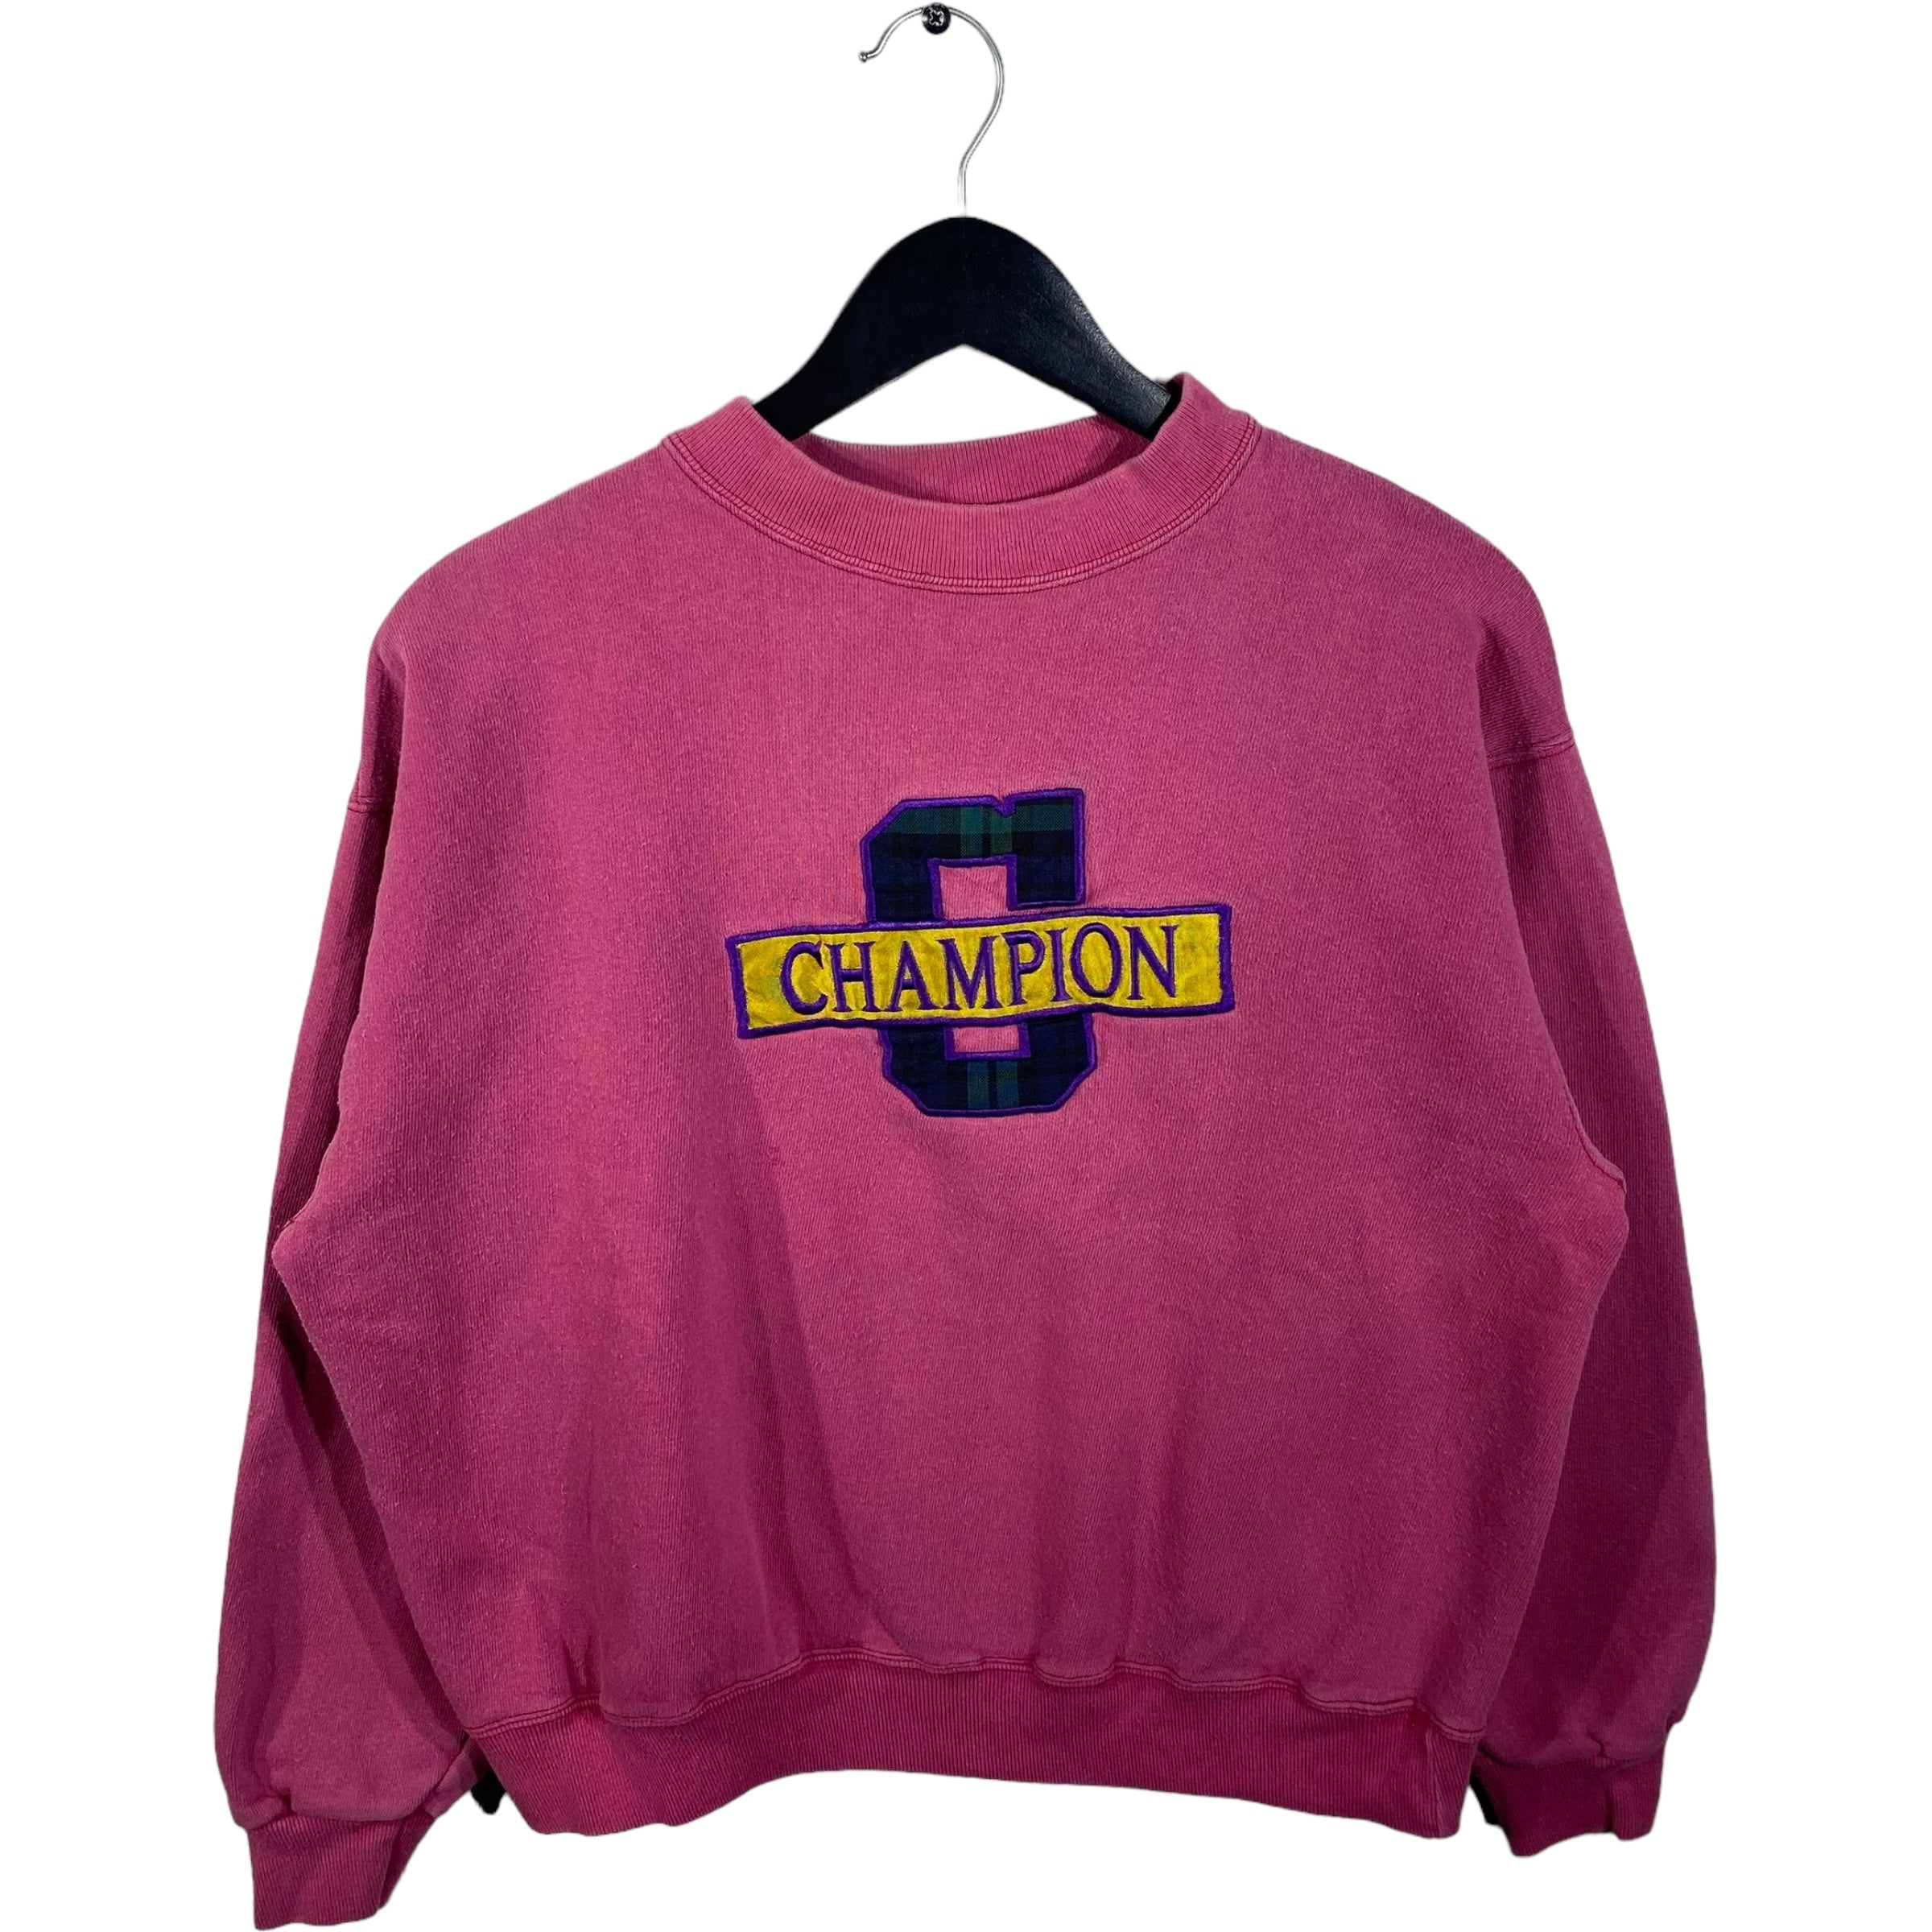 Vintage Champion Spell Out Crewneck